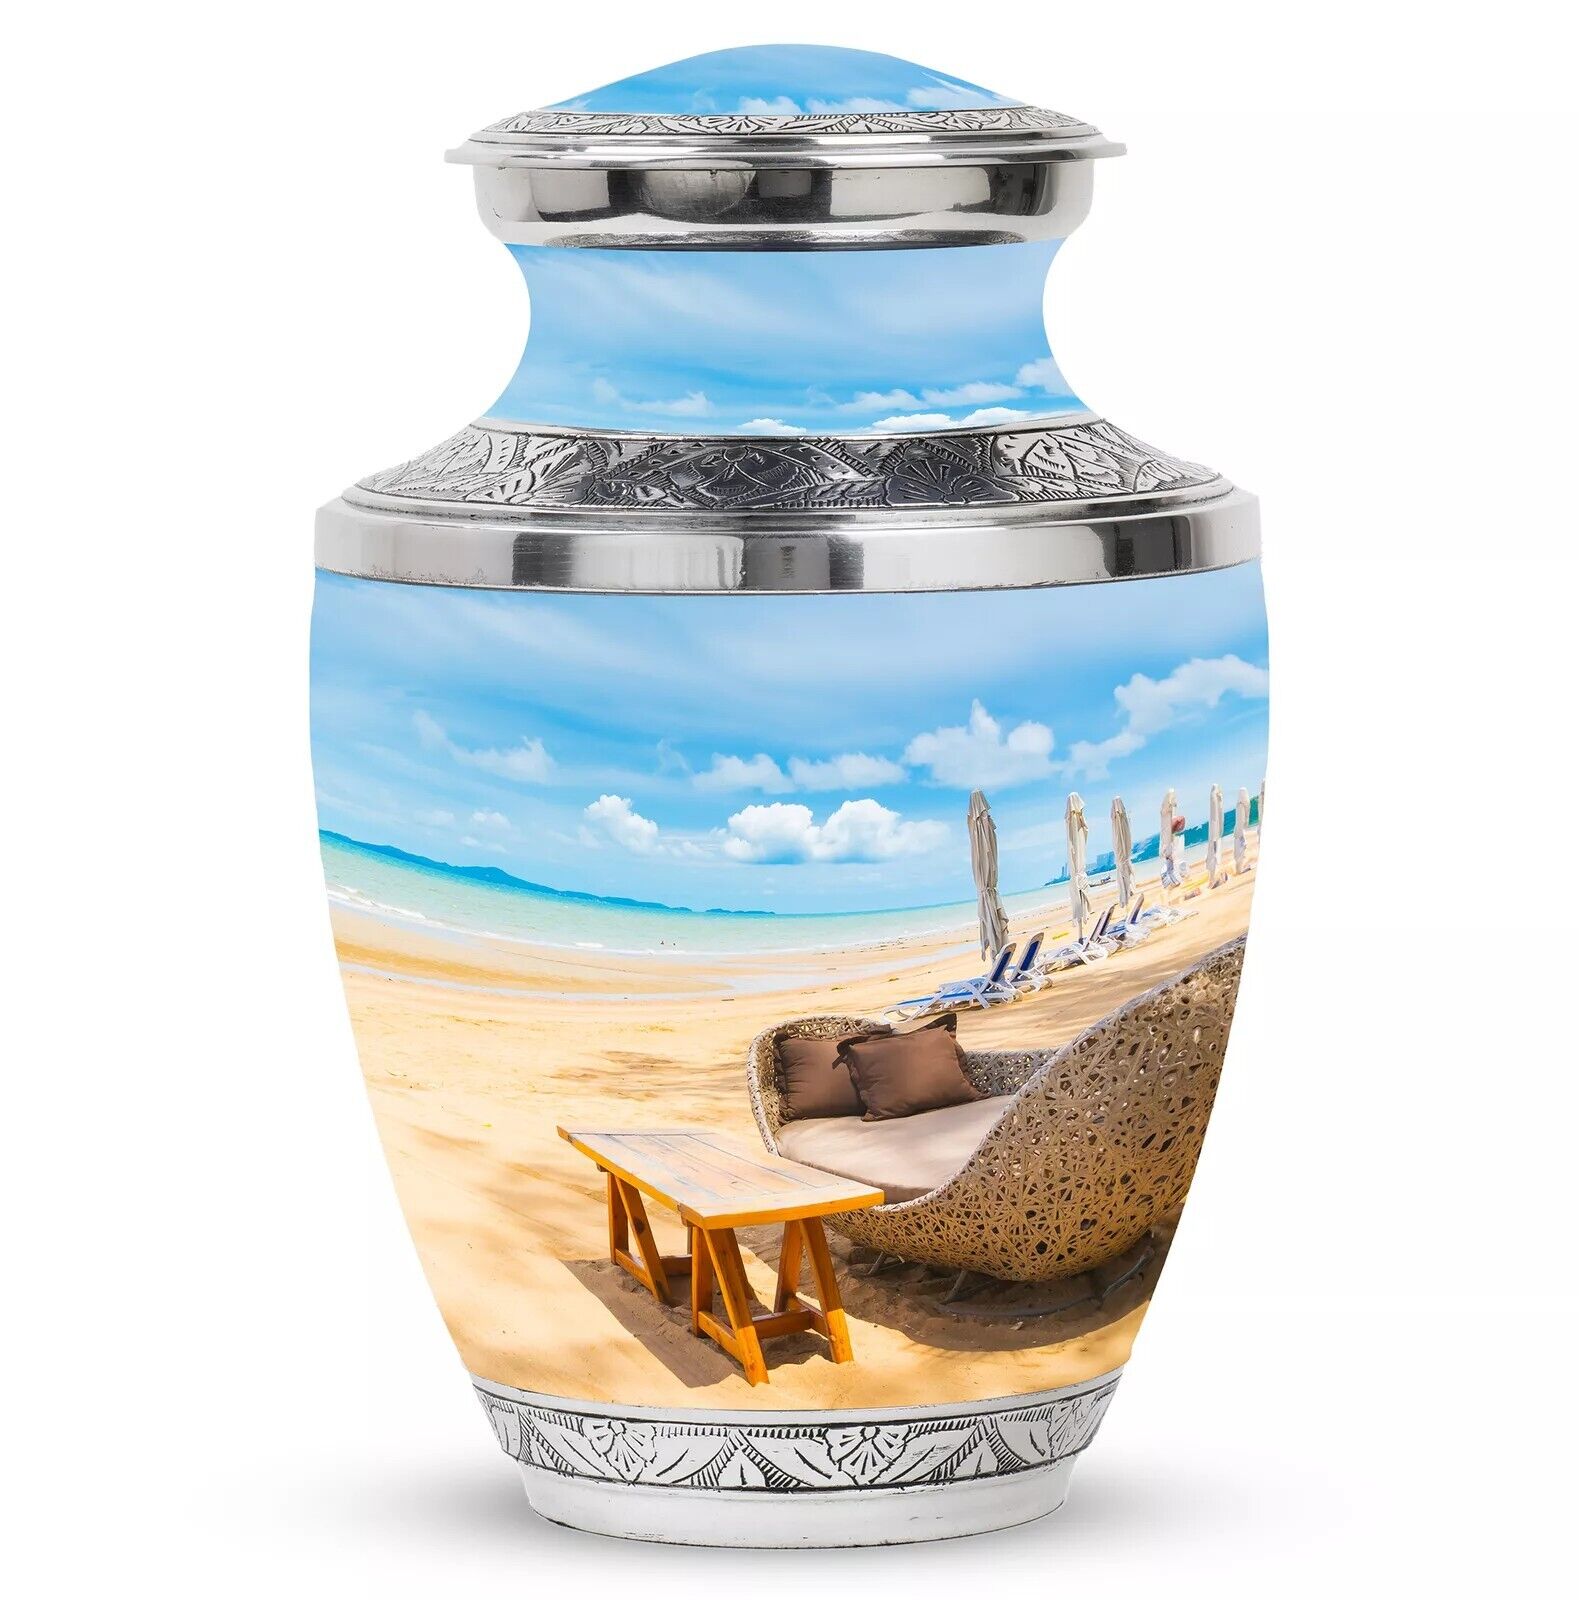 Goa Beach Side (10 Inch) Cremation Urns For Adult Ashes The Memory Of Your Loved